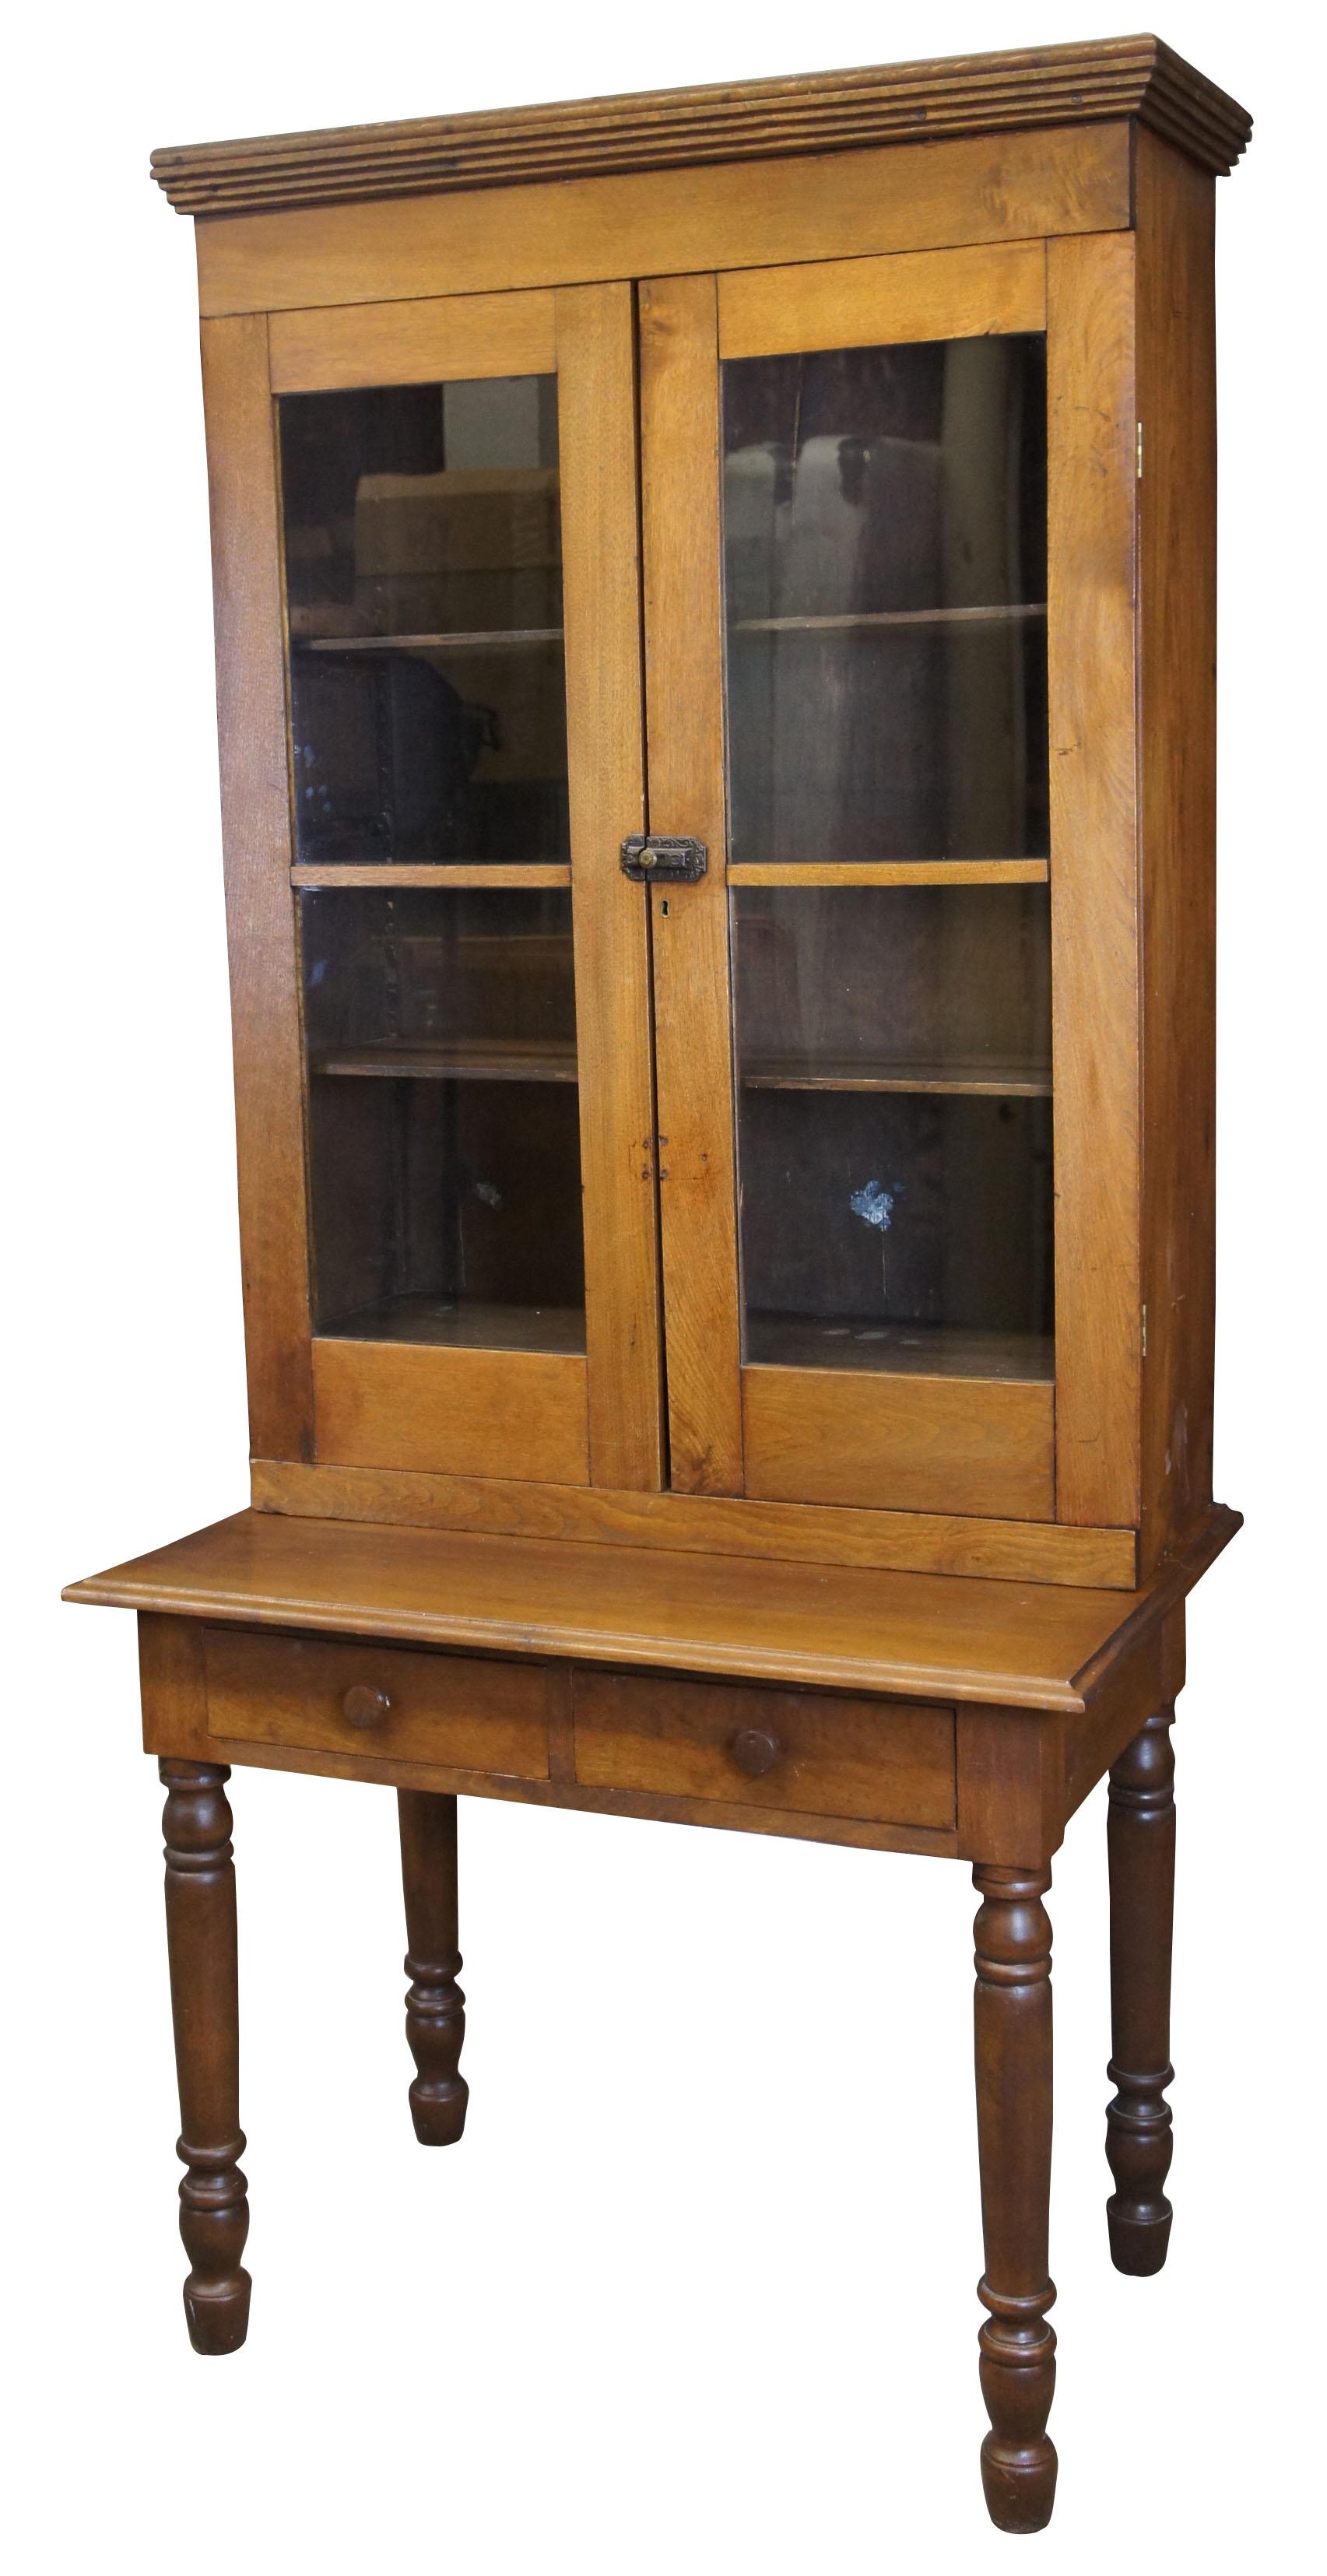 Primitive antique solid walnut plantation desk stepback cabinet hutch bookcase

Late 19th century plantation desk. Features two drawers and hutch. Hutch opens to ten cubbies and two adjustable shelves. Also features a latch along the top and